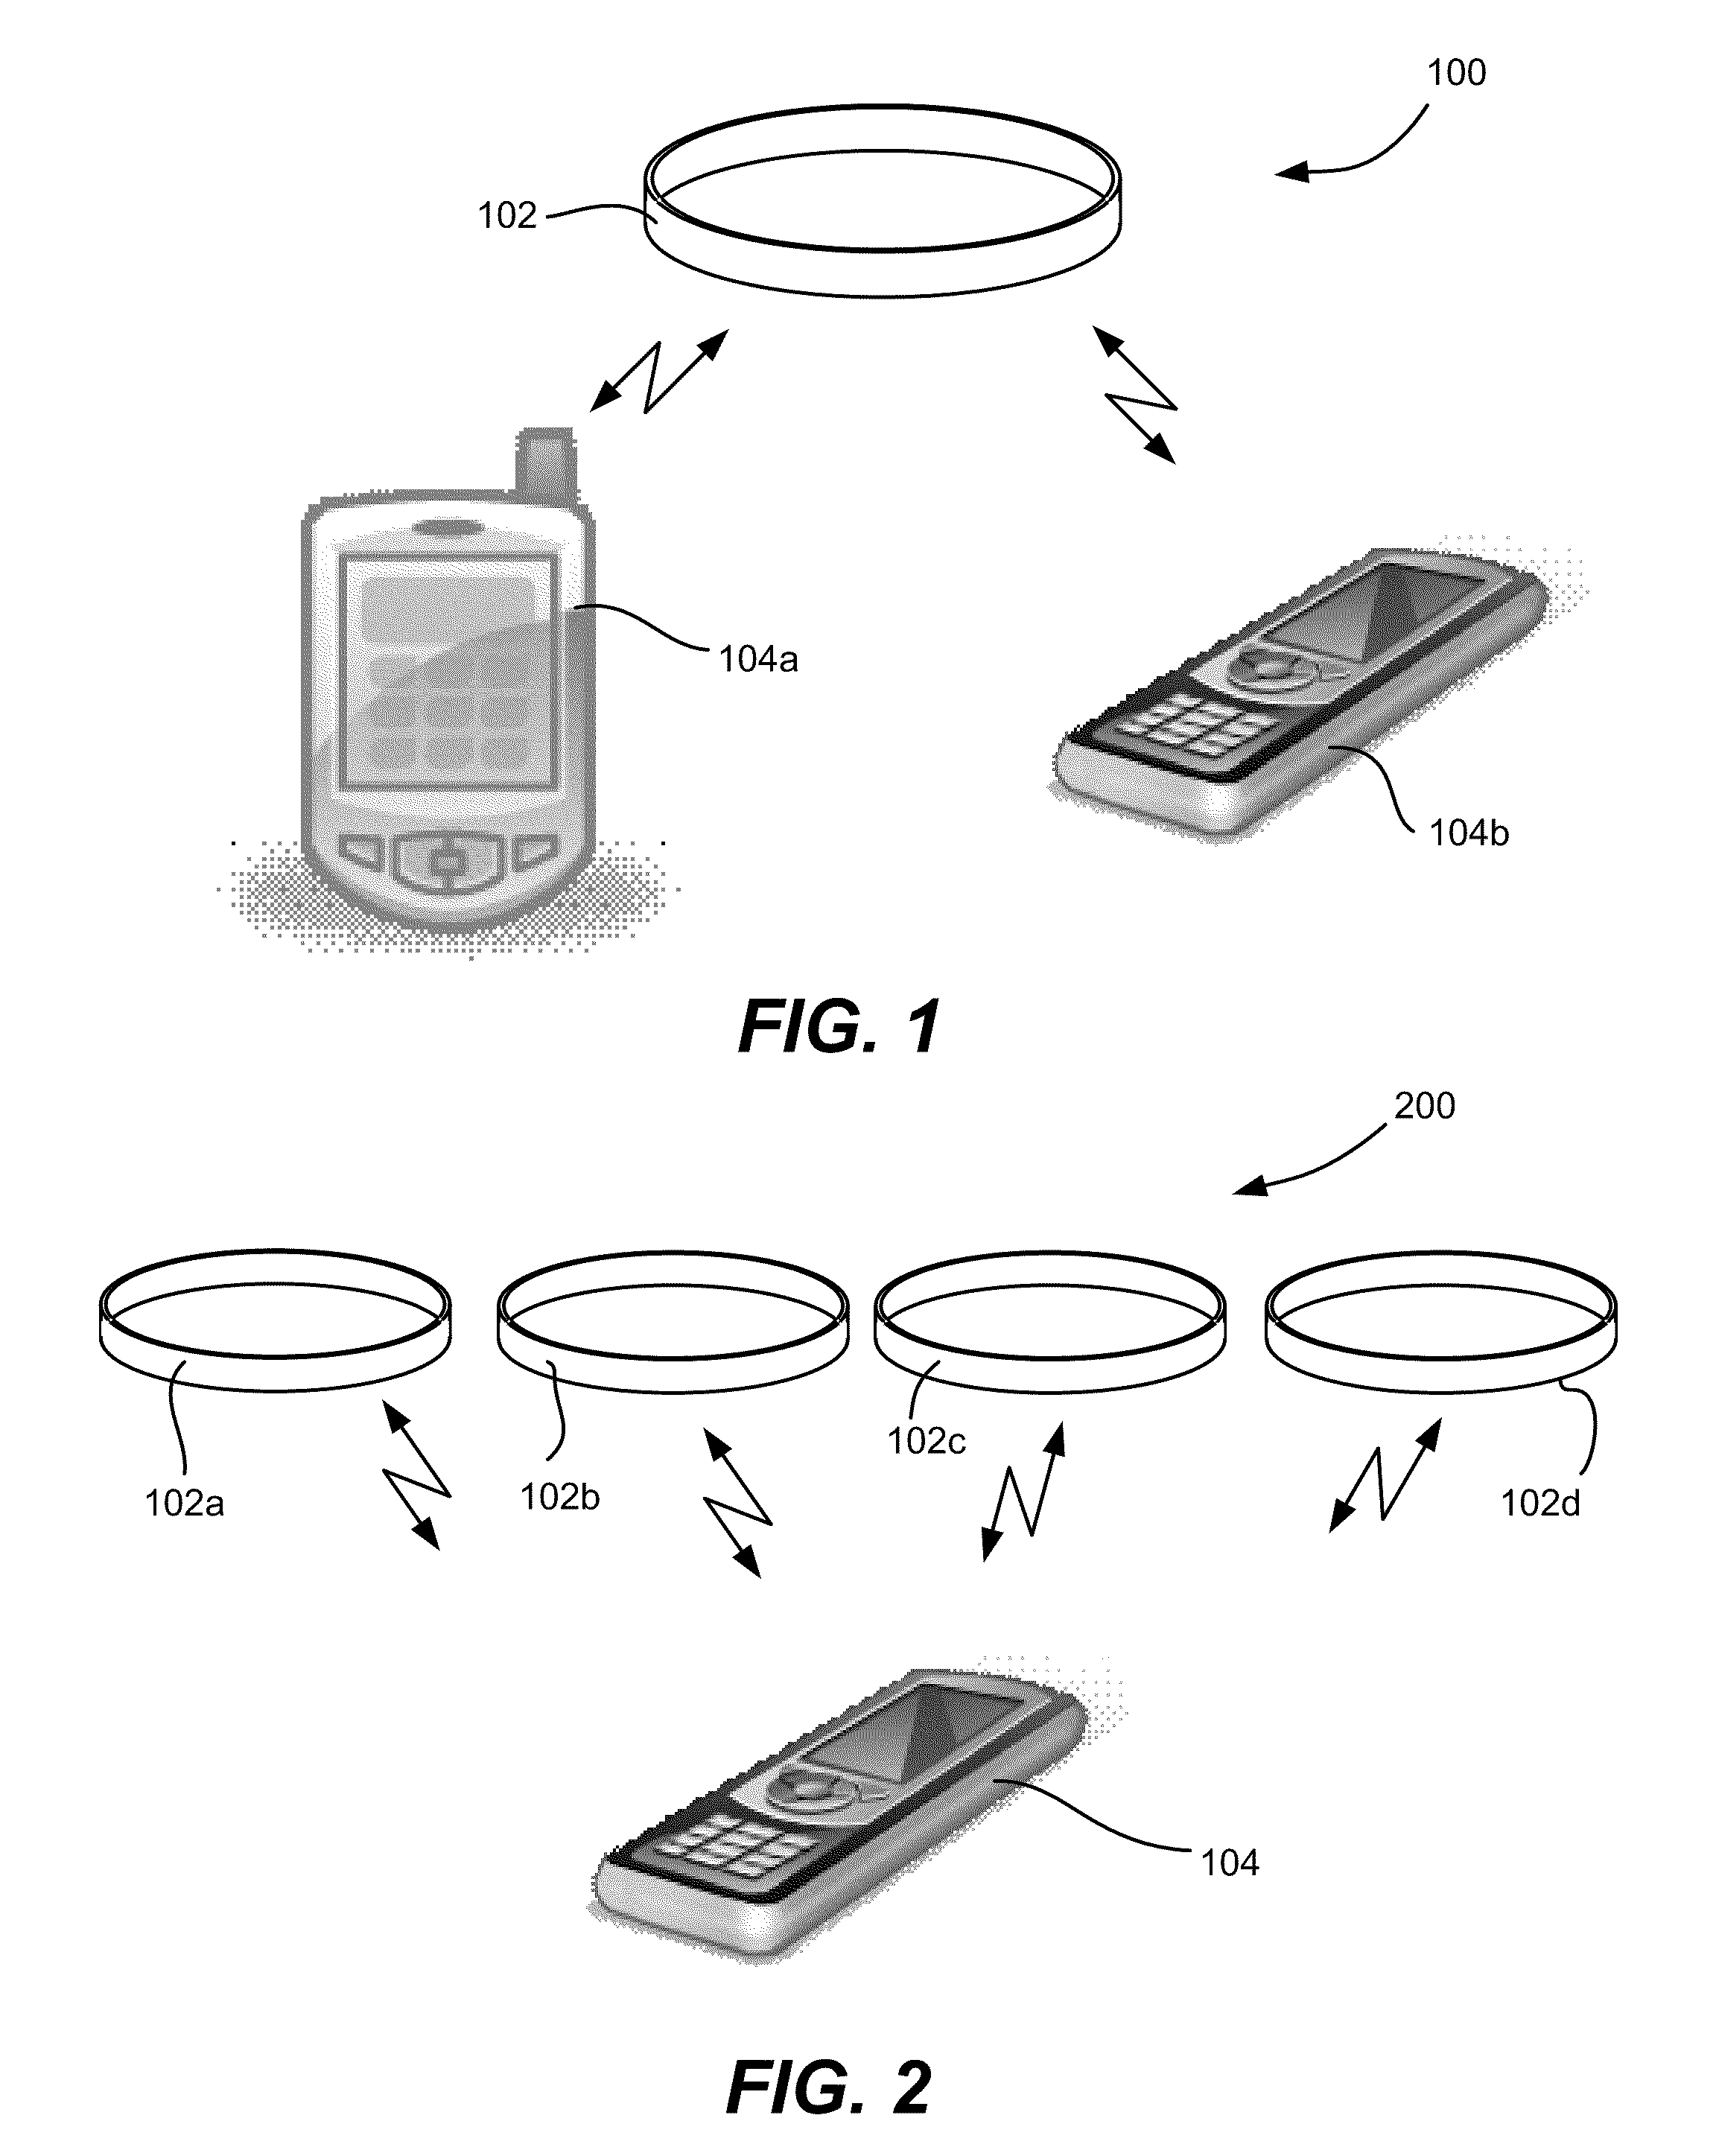 Systems and methods for portable exergaming